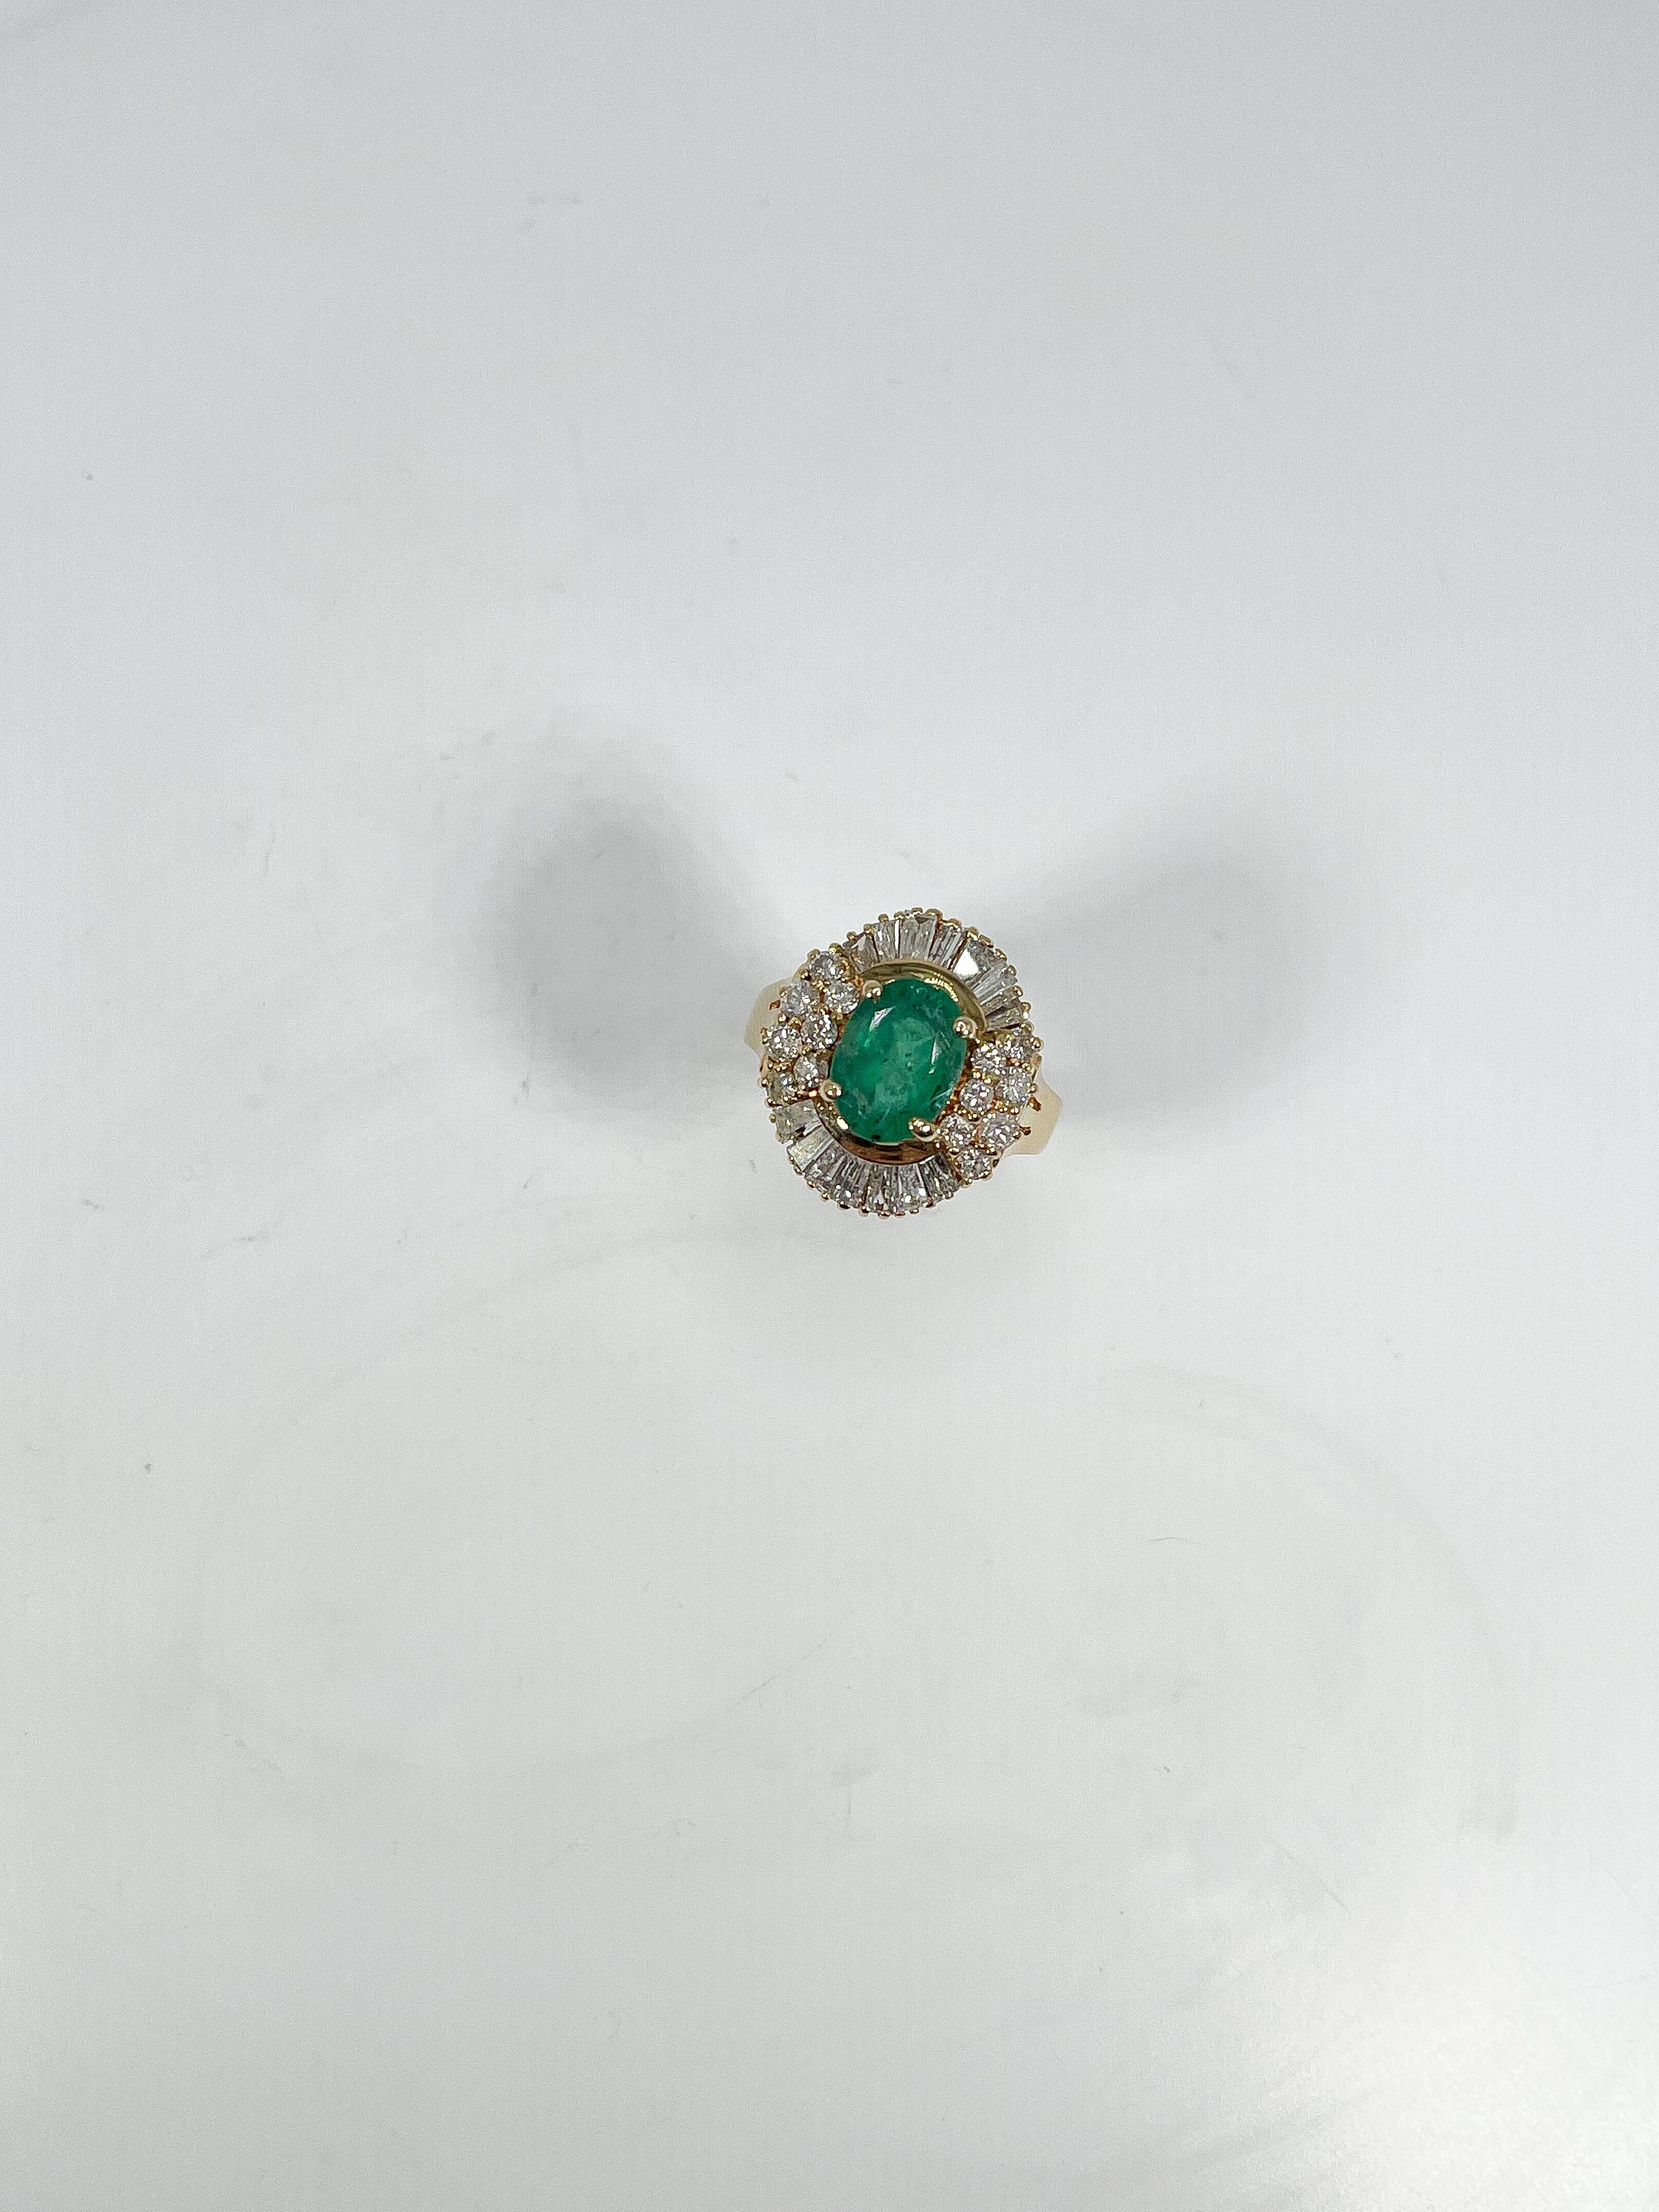 14k yellow gold 2 CT emerald and 1 CTW diamond ballerina ring. The emerald is an oval, the diamonds are round and baguette, the size of the ring is a 6, the width is 17 mm, and it has a total weight of 5.8 grams.